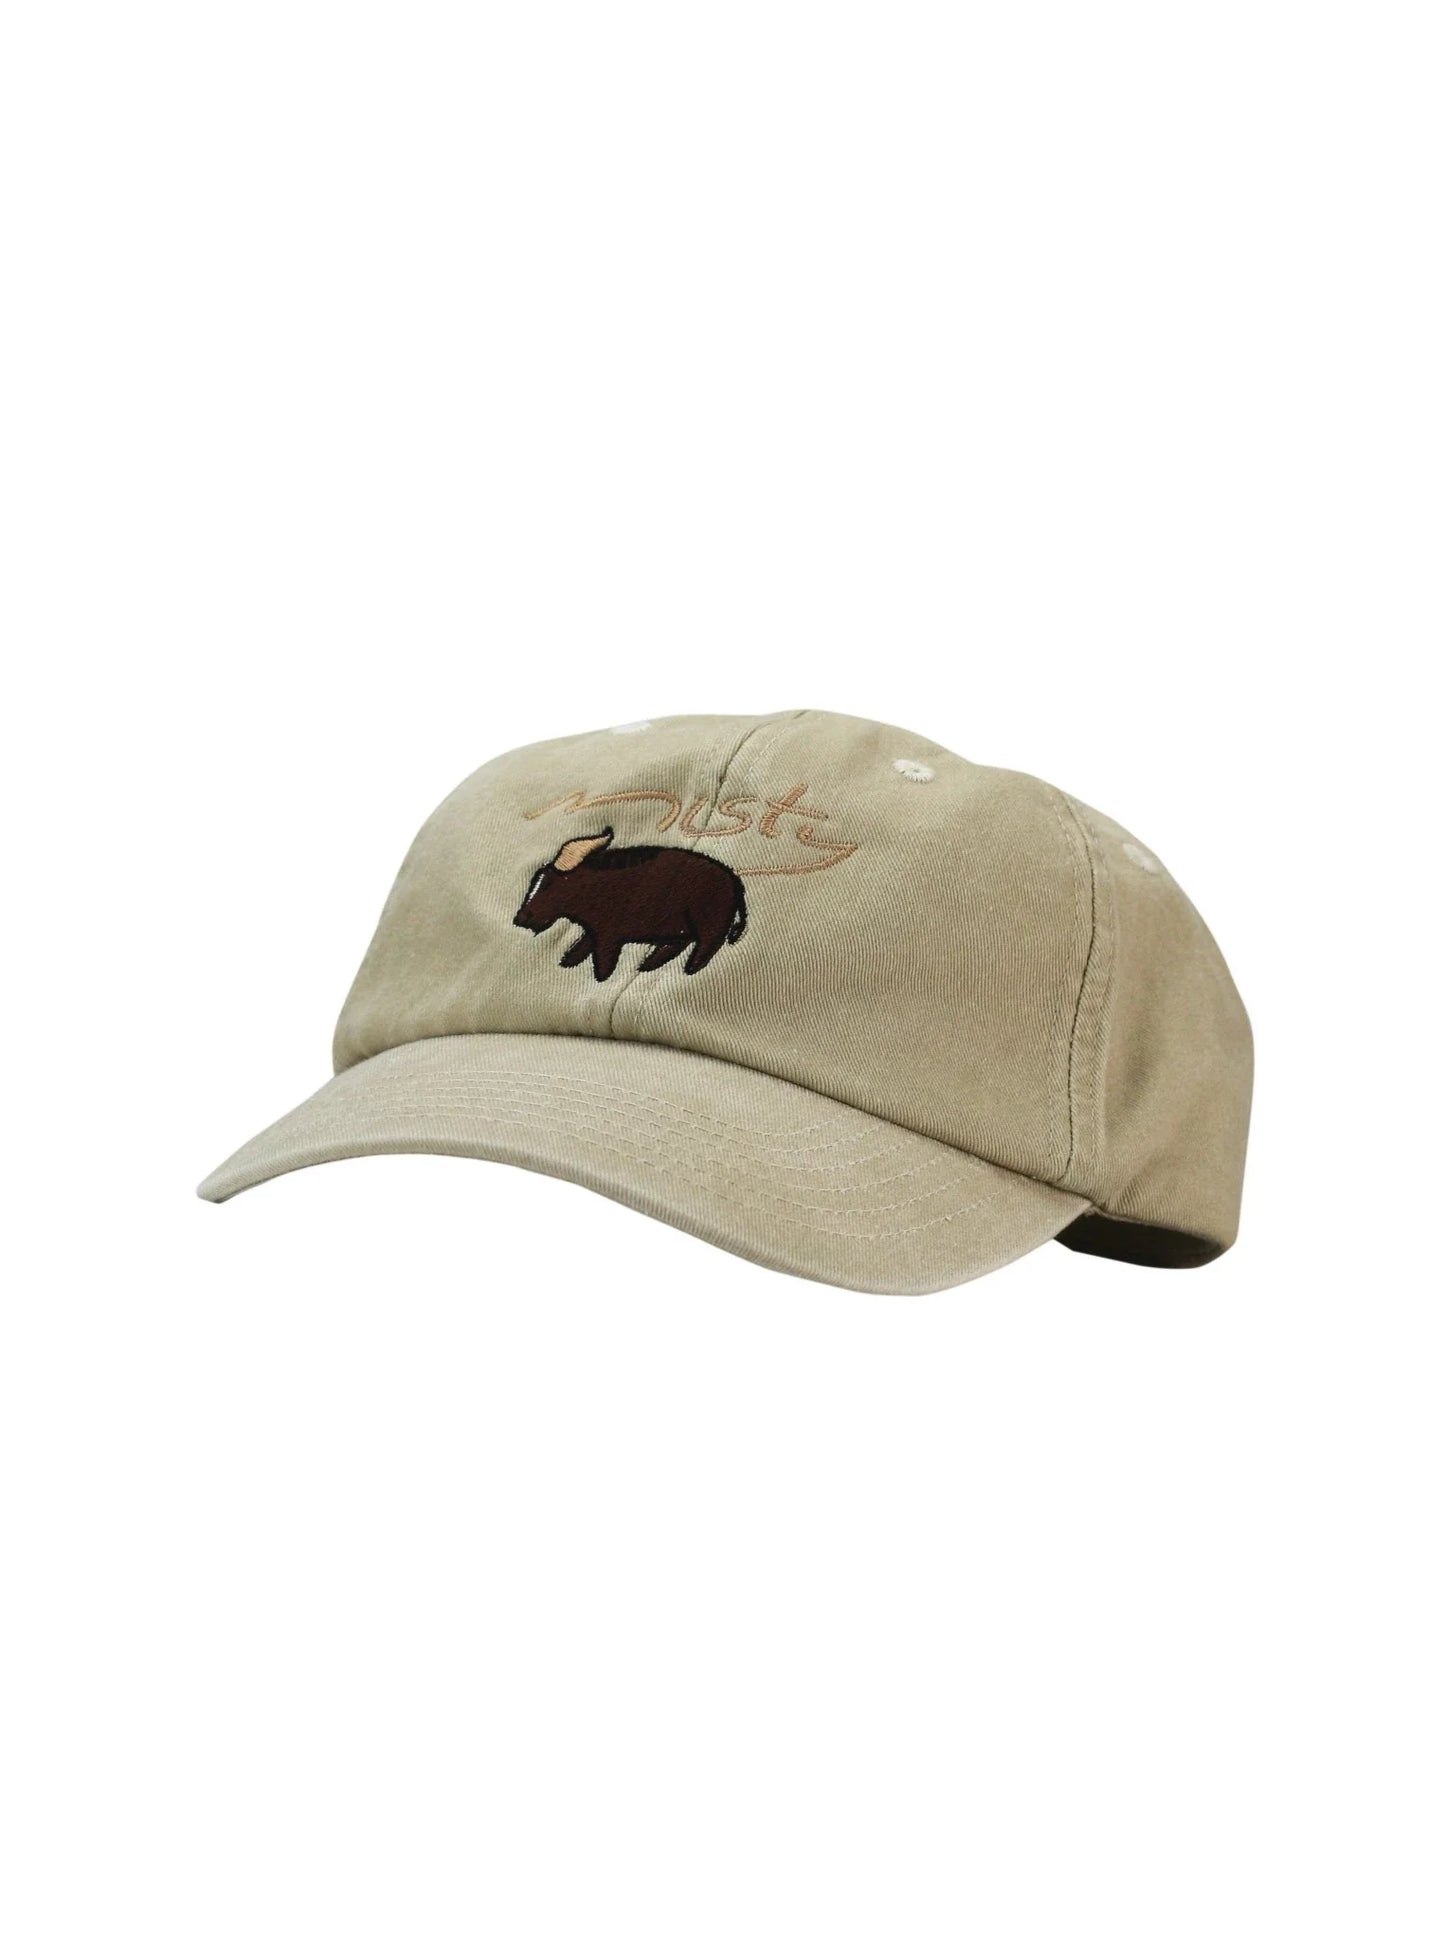 Cap in vintage cotton in stone with yak and Misty Cashmere logo.